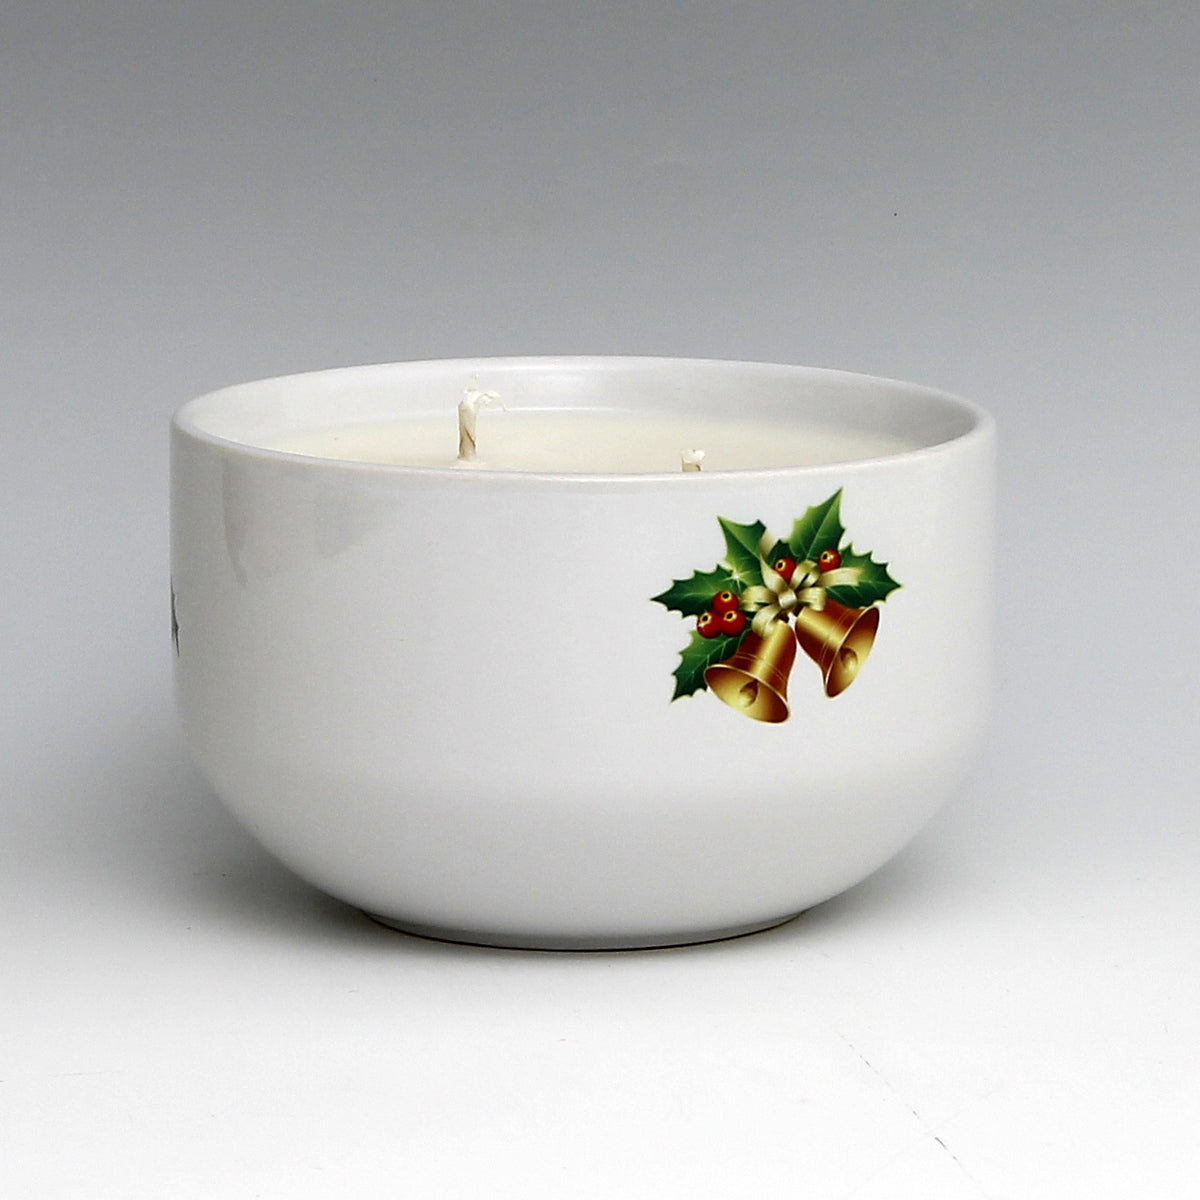 SUBLIMART: Two Wicks Soy Wax Candle in a Porcelain Bowl - Santa Claus (Design #XMS04)